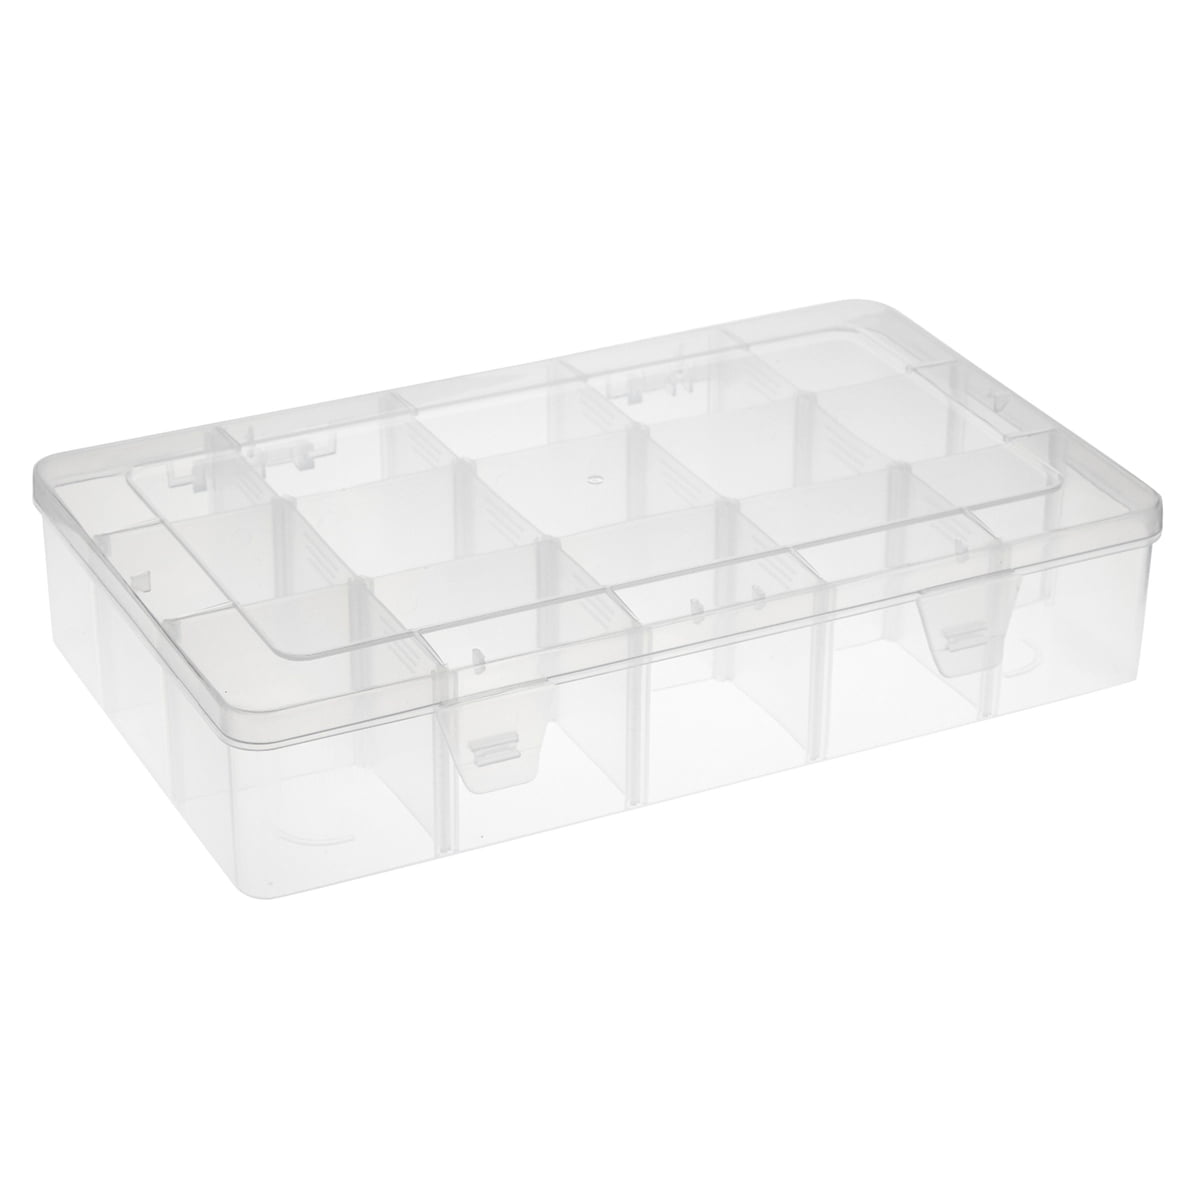  UTENEW 2 Pack Plastic Clear Jewelry Boxes Organizers with  Dividers, 6-Grids Storage Containers : Arts, Crafts & Sewing